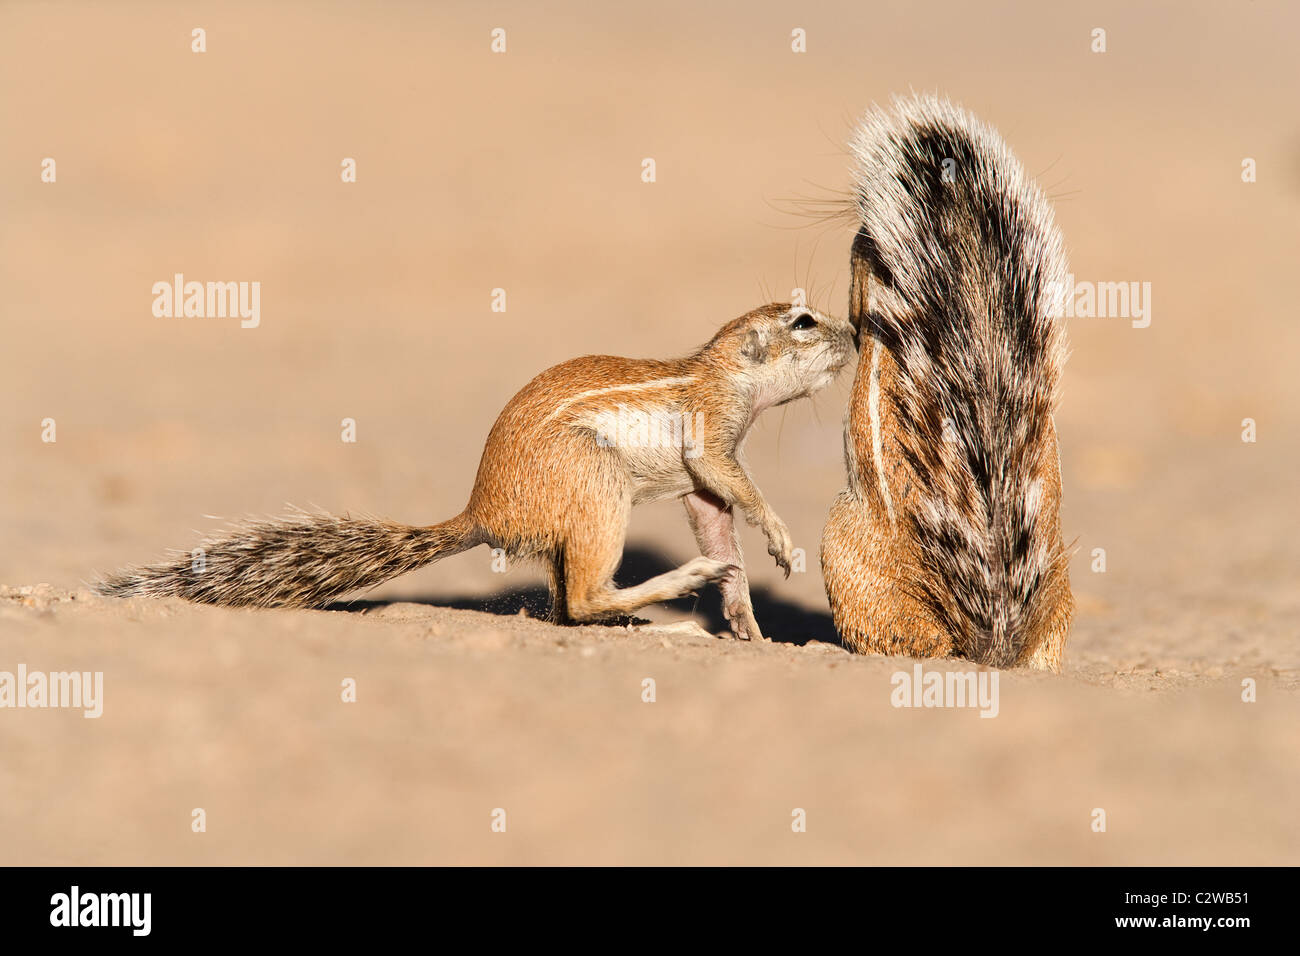 Ground squirrels, Xerus inauris, greeting, Kgalagadi Transfrontier Park, Northern Cape, South Africa Stock Photo